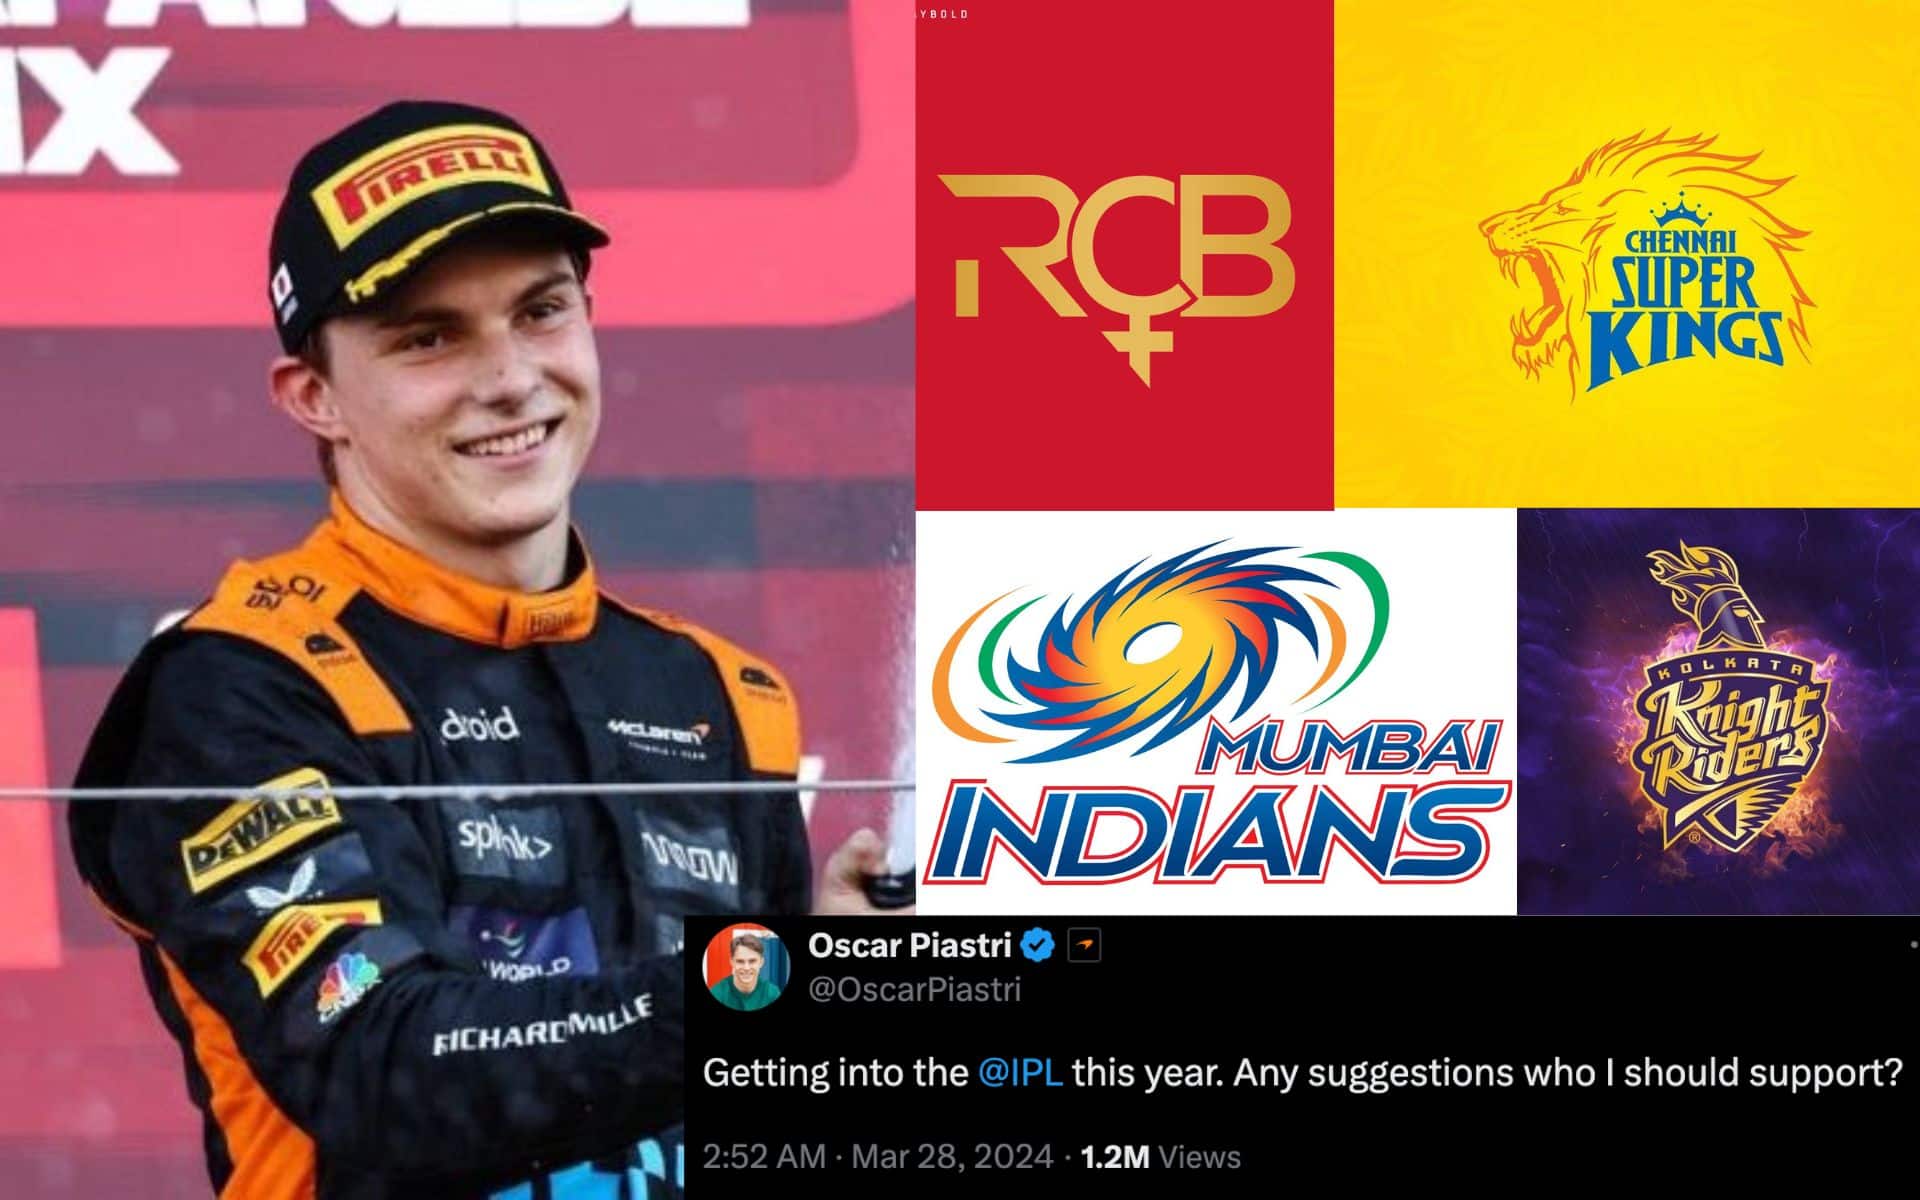 Oscar Piastri's curious tweet brought the F1 & cricket together
